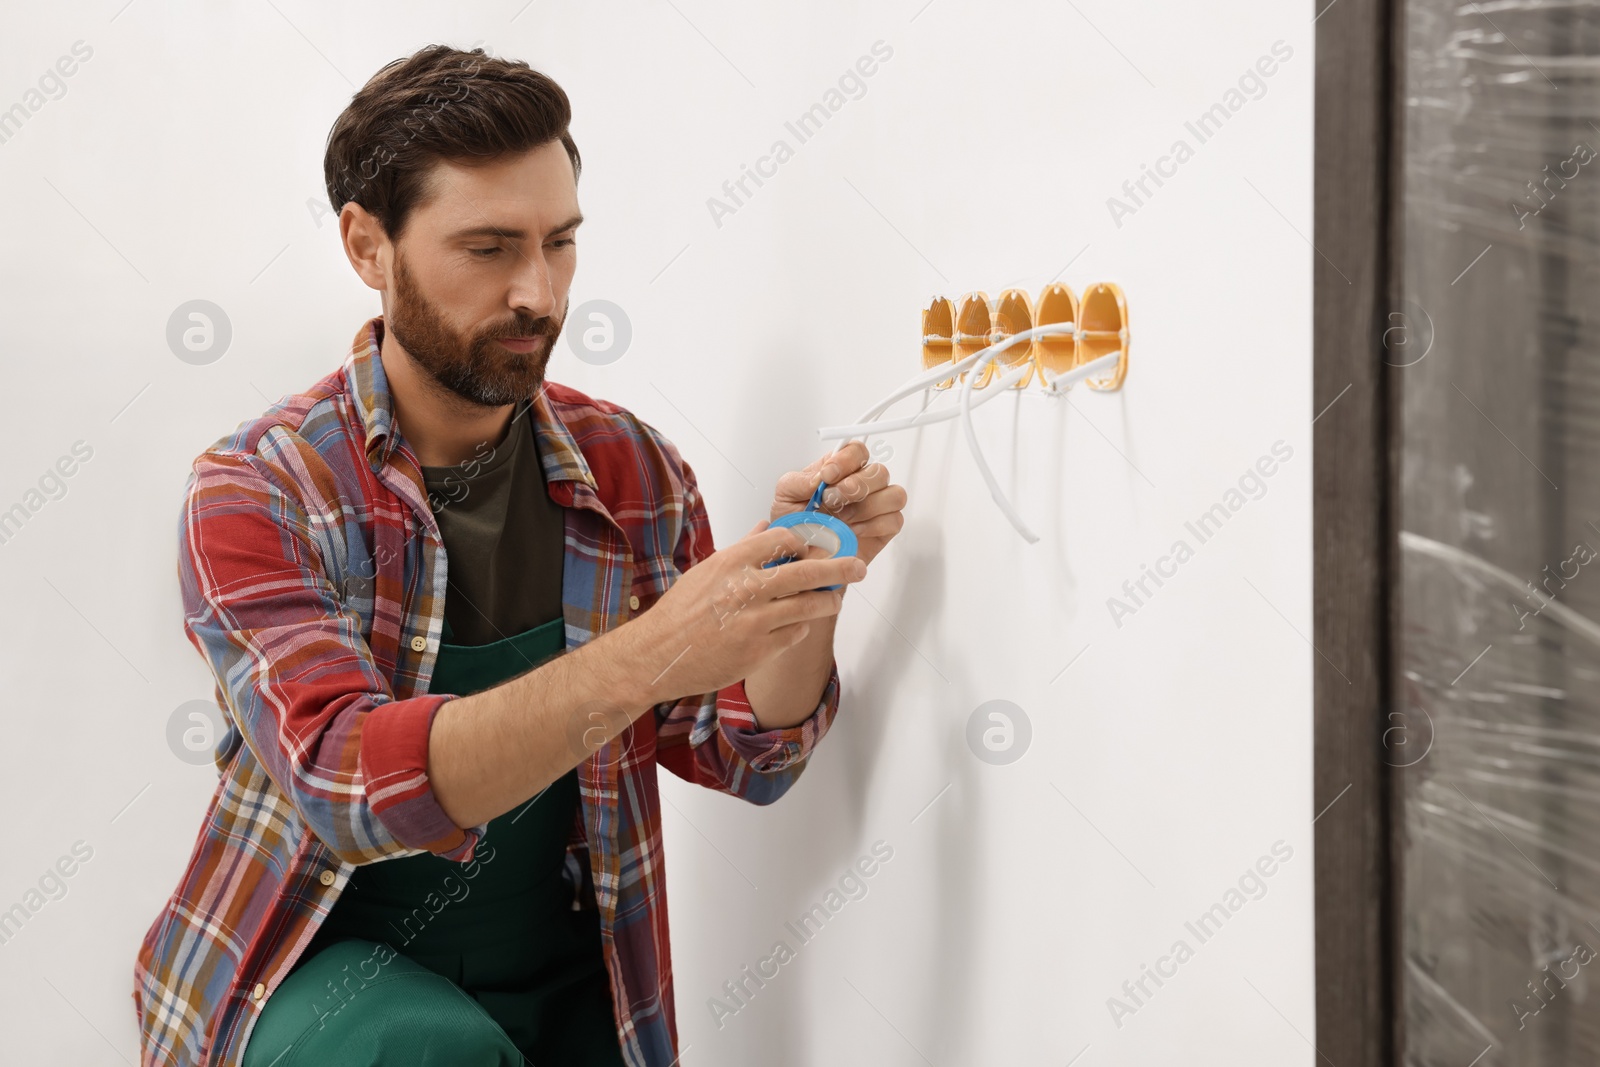 Photo of Electrician fixing wires with insulating tape indoors